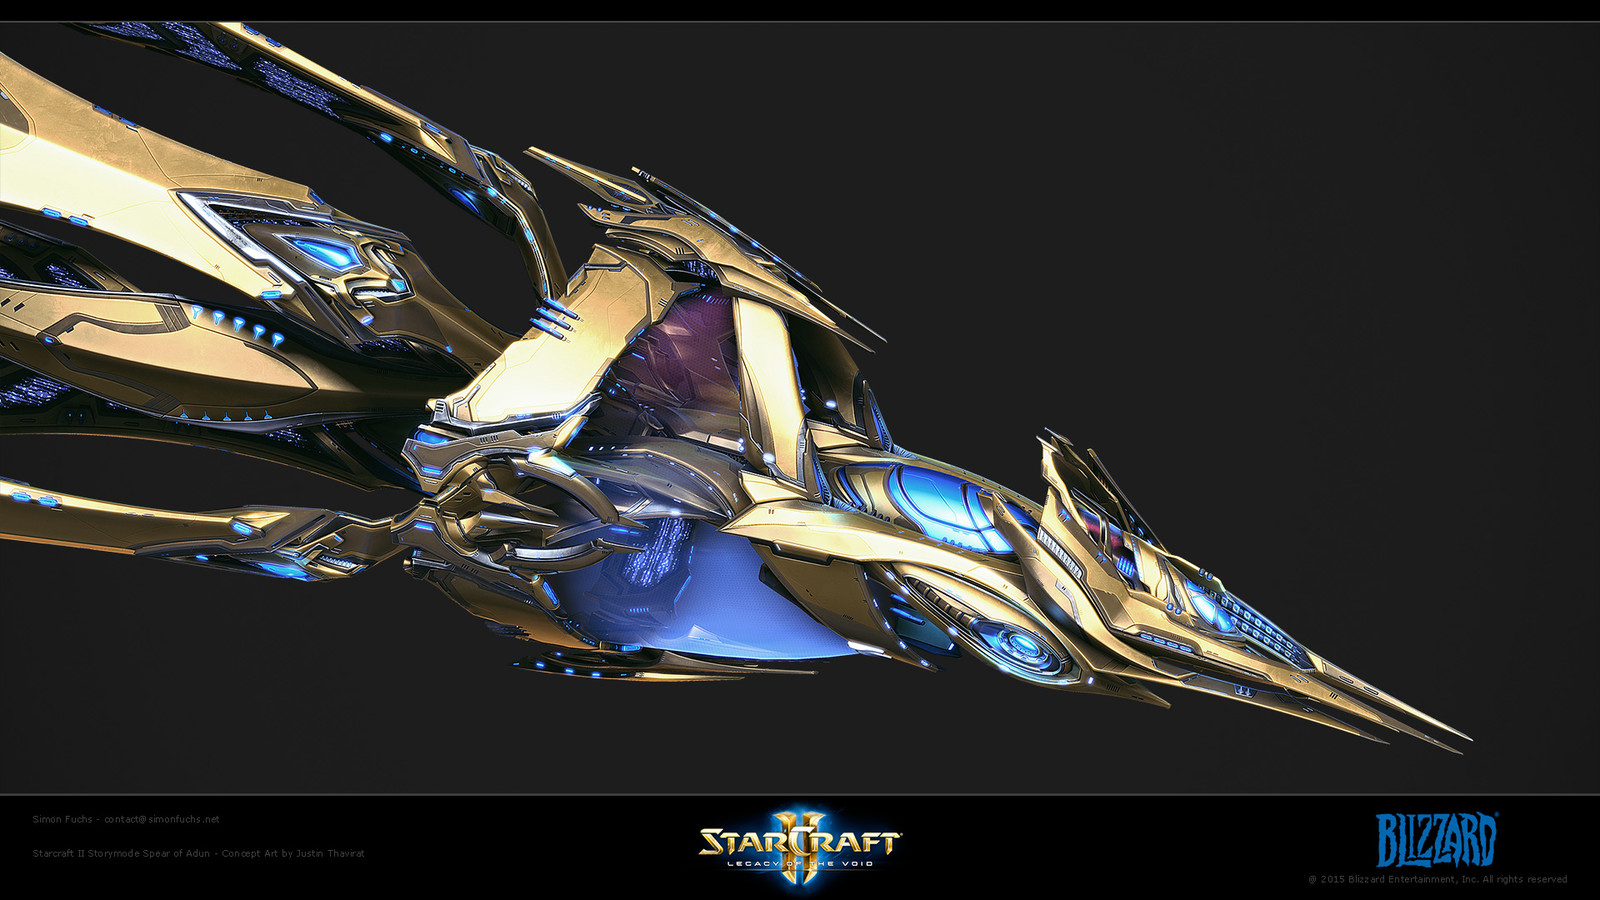 Starcraft II Legacy of the Void - Spear of Adun - InGame.